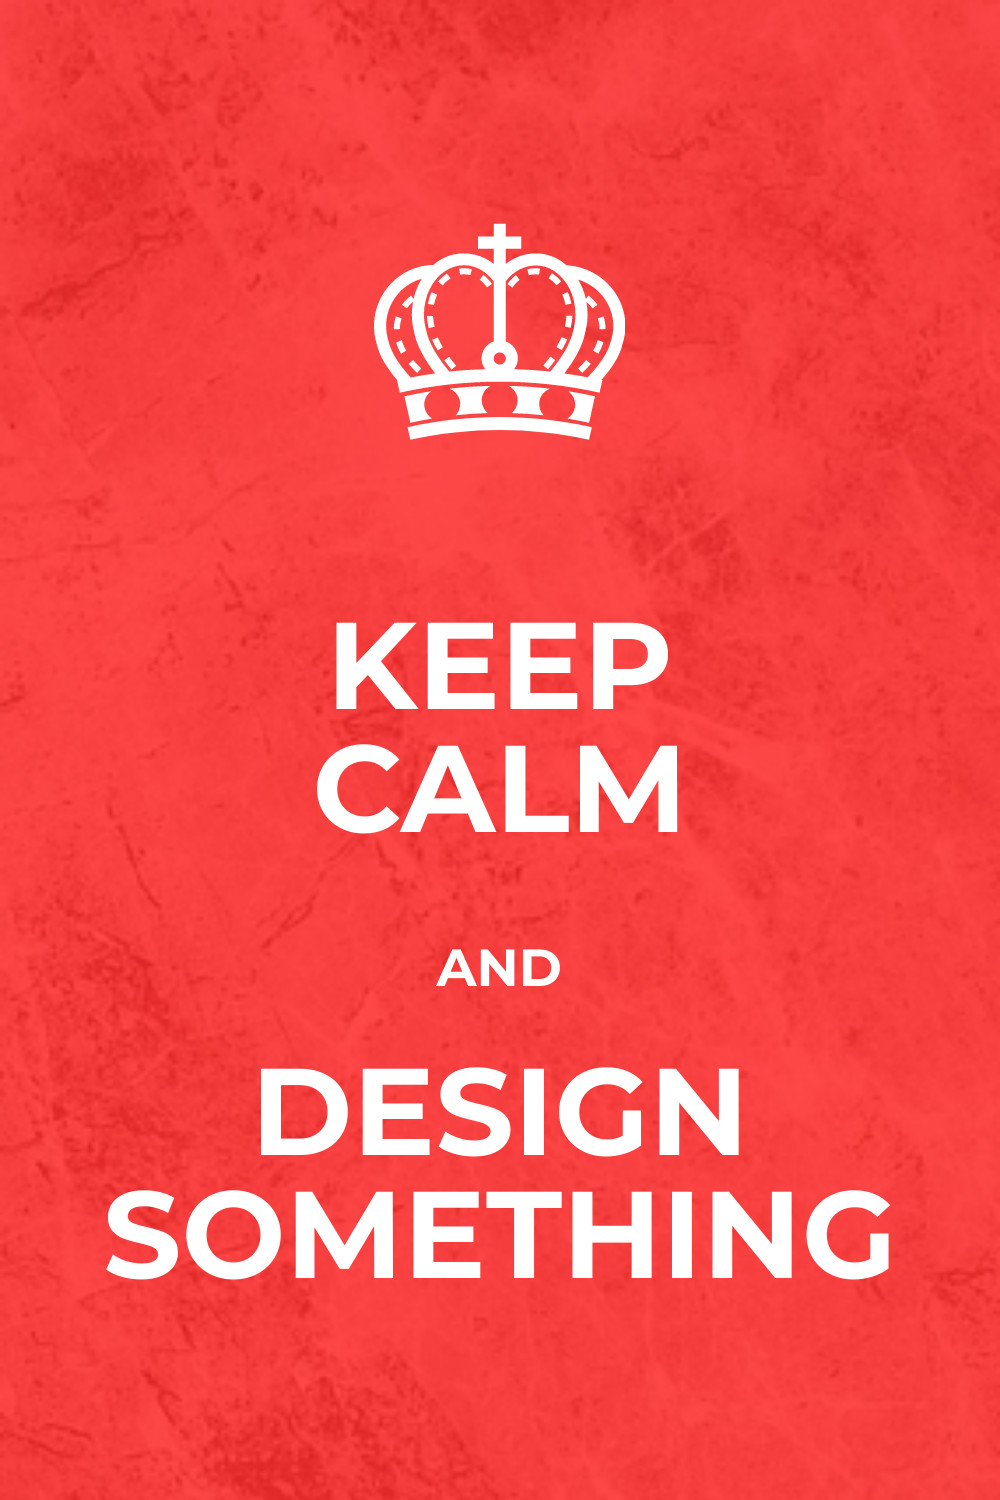 Keep Calm and Design Something